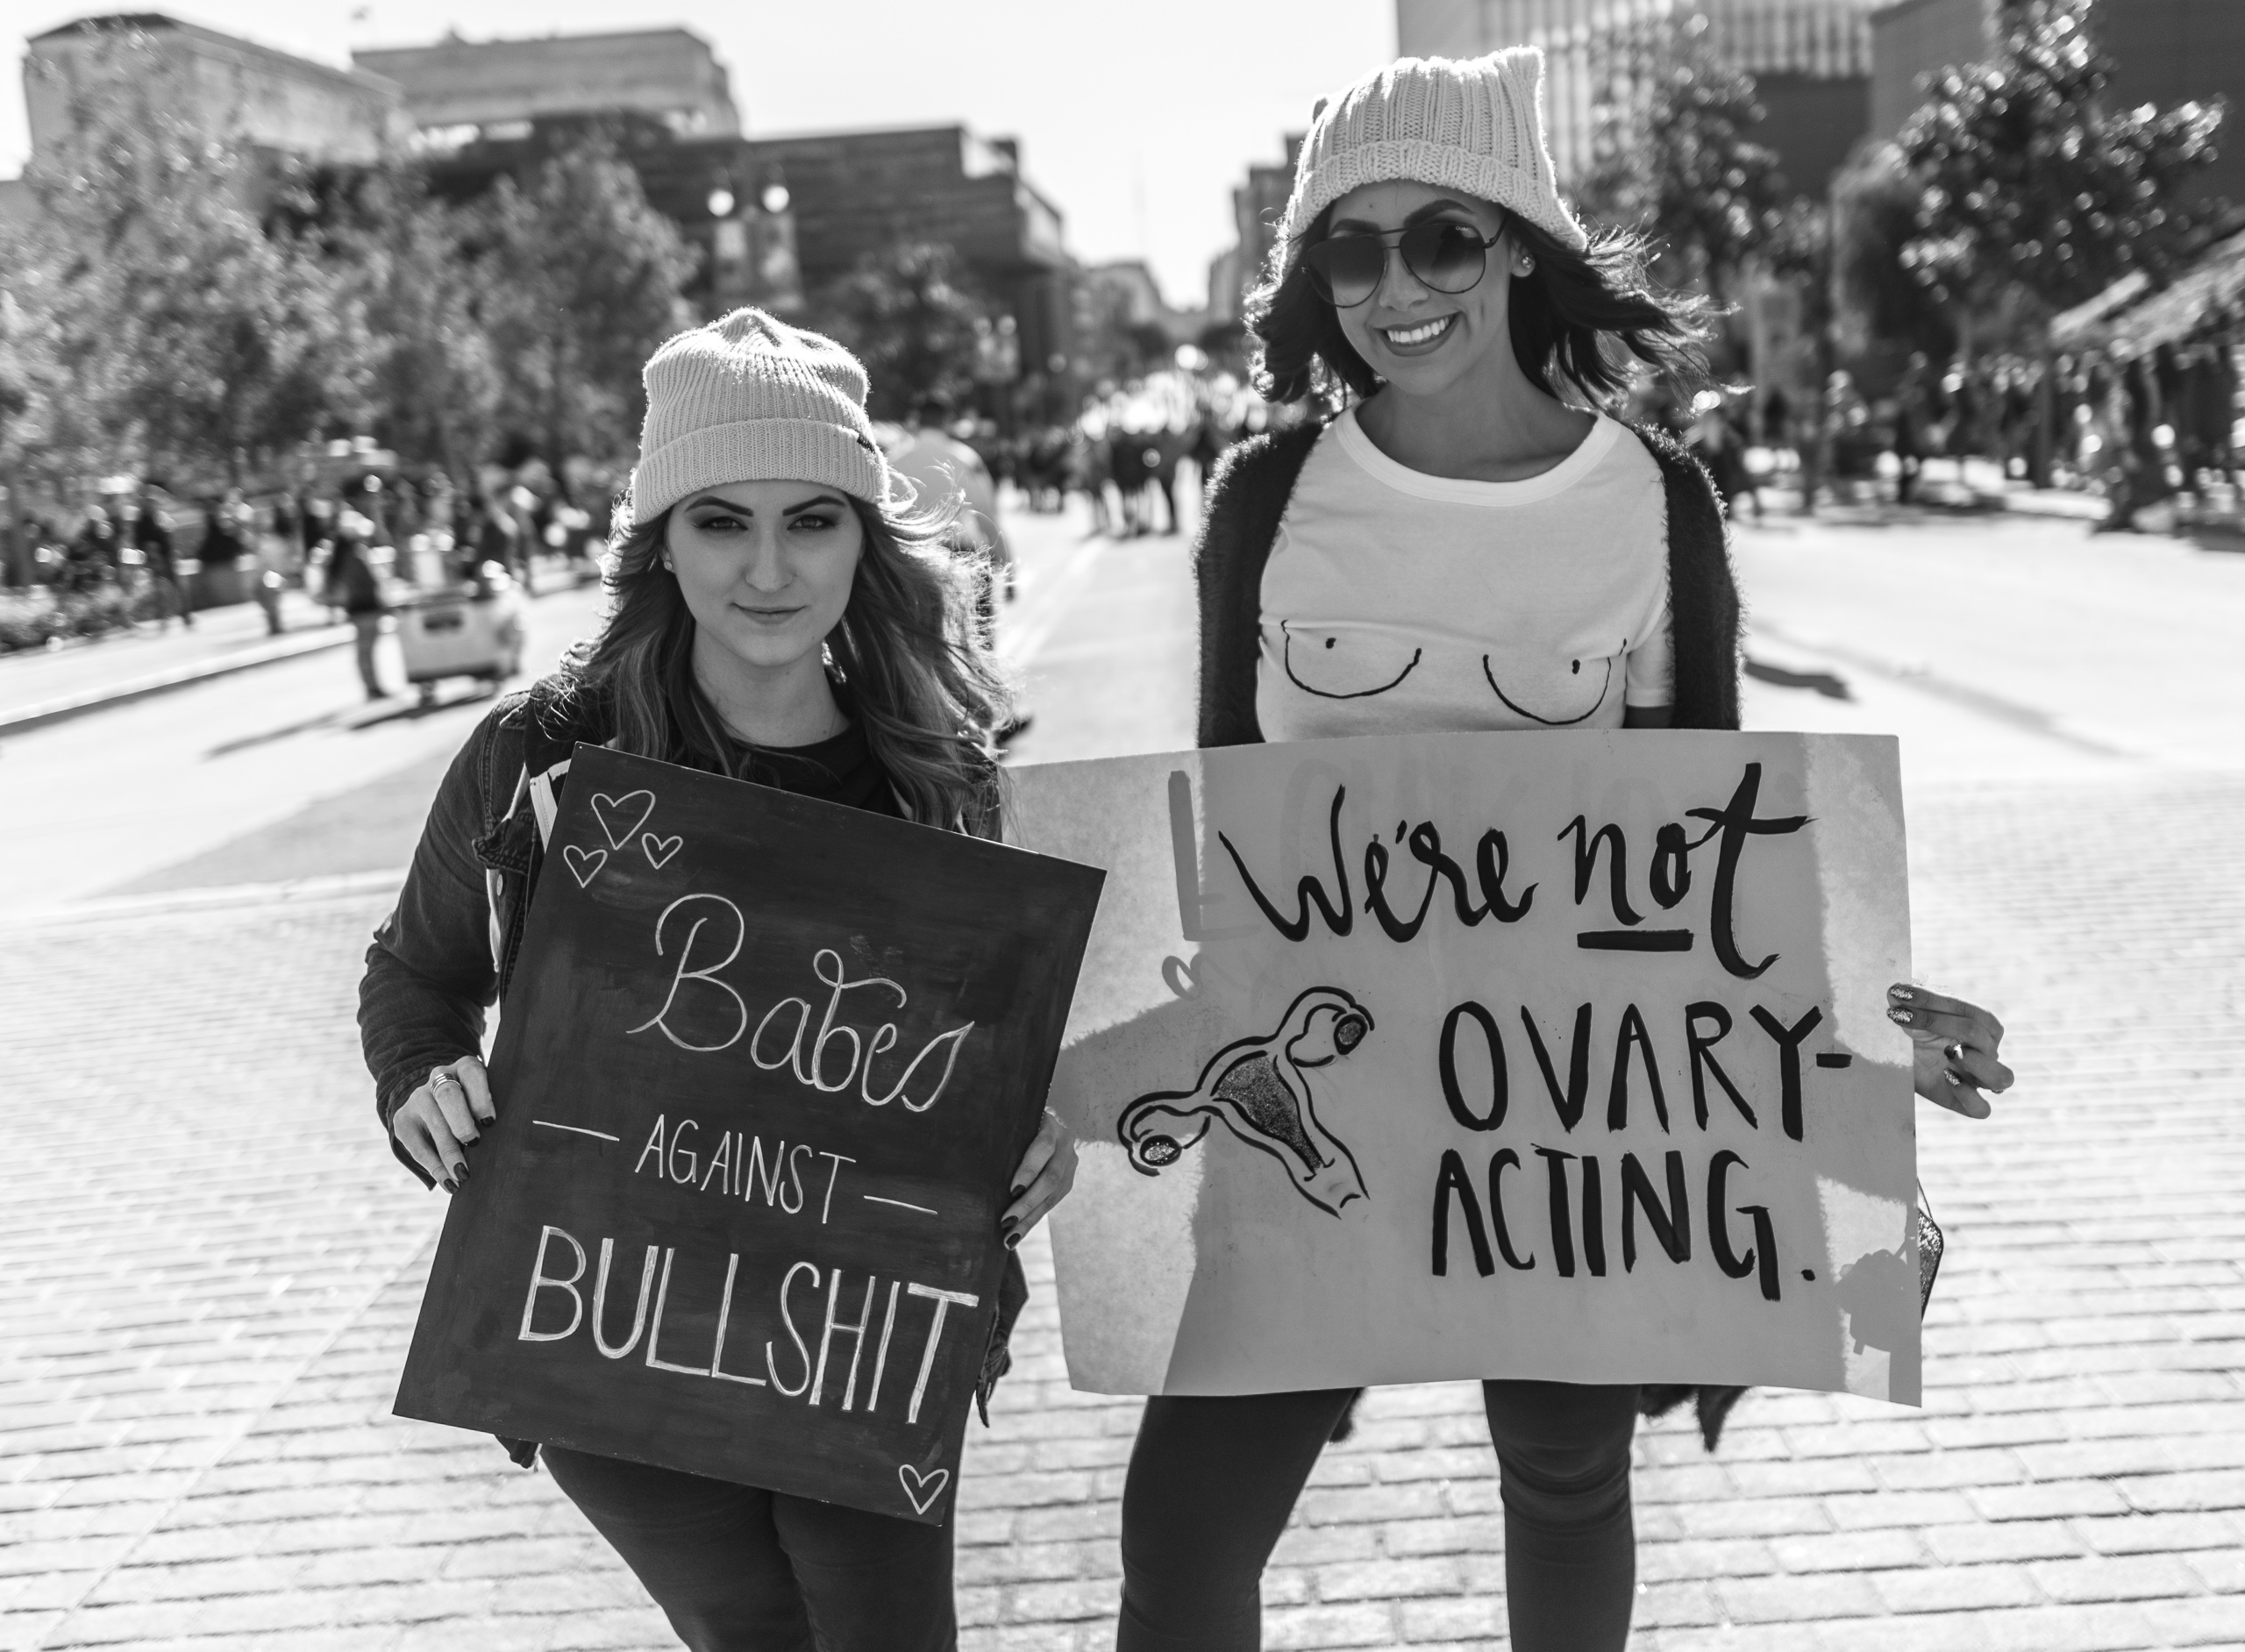 Nonfiction Photography (photojournalism) two women stand in the street at the end of the 2018 LA Women's March. One holds a sign that reads "Babes against Bullshit" and the other holds a sigh that reads "We're not ovary-acting"